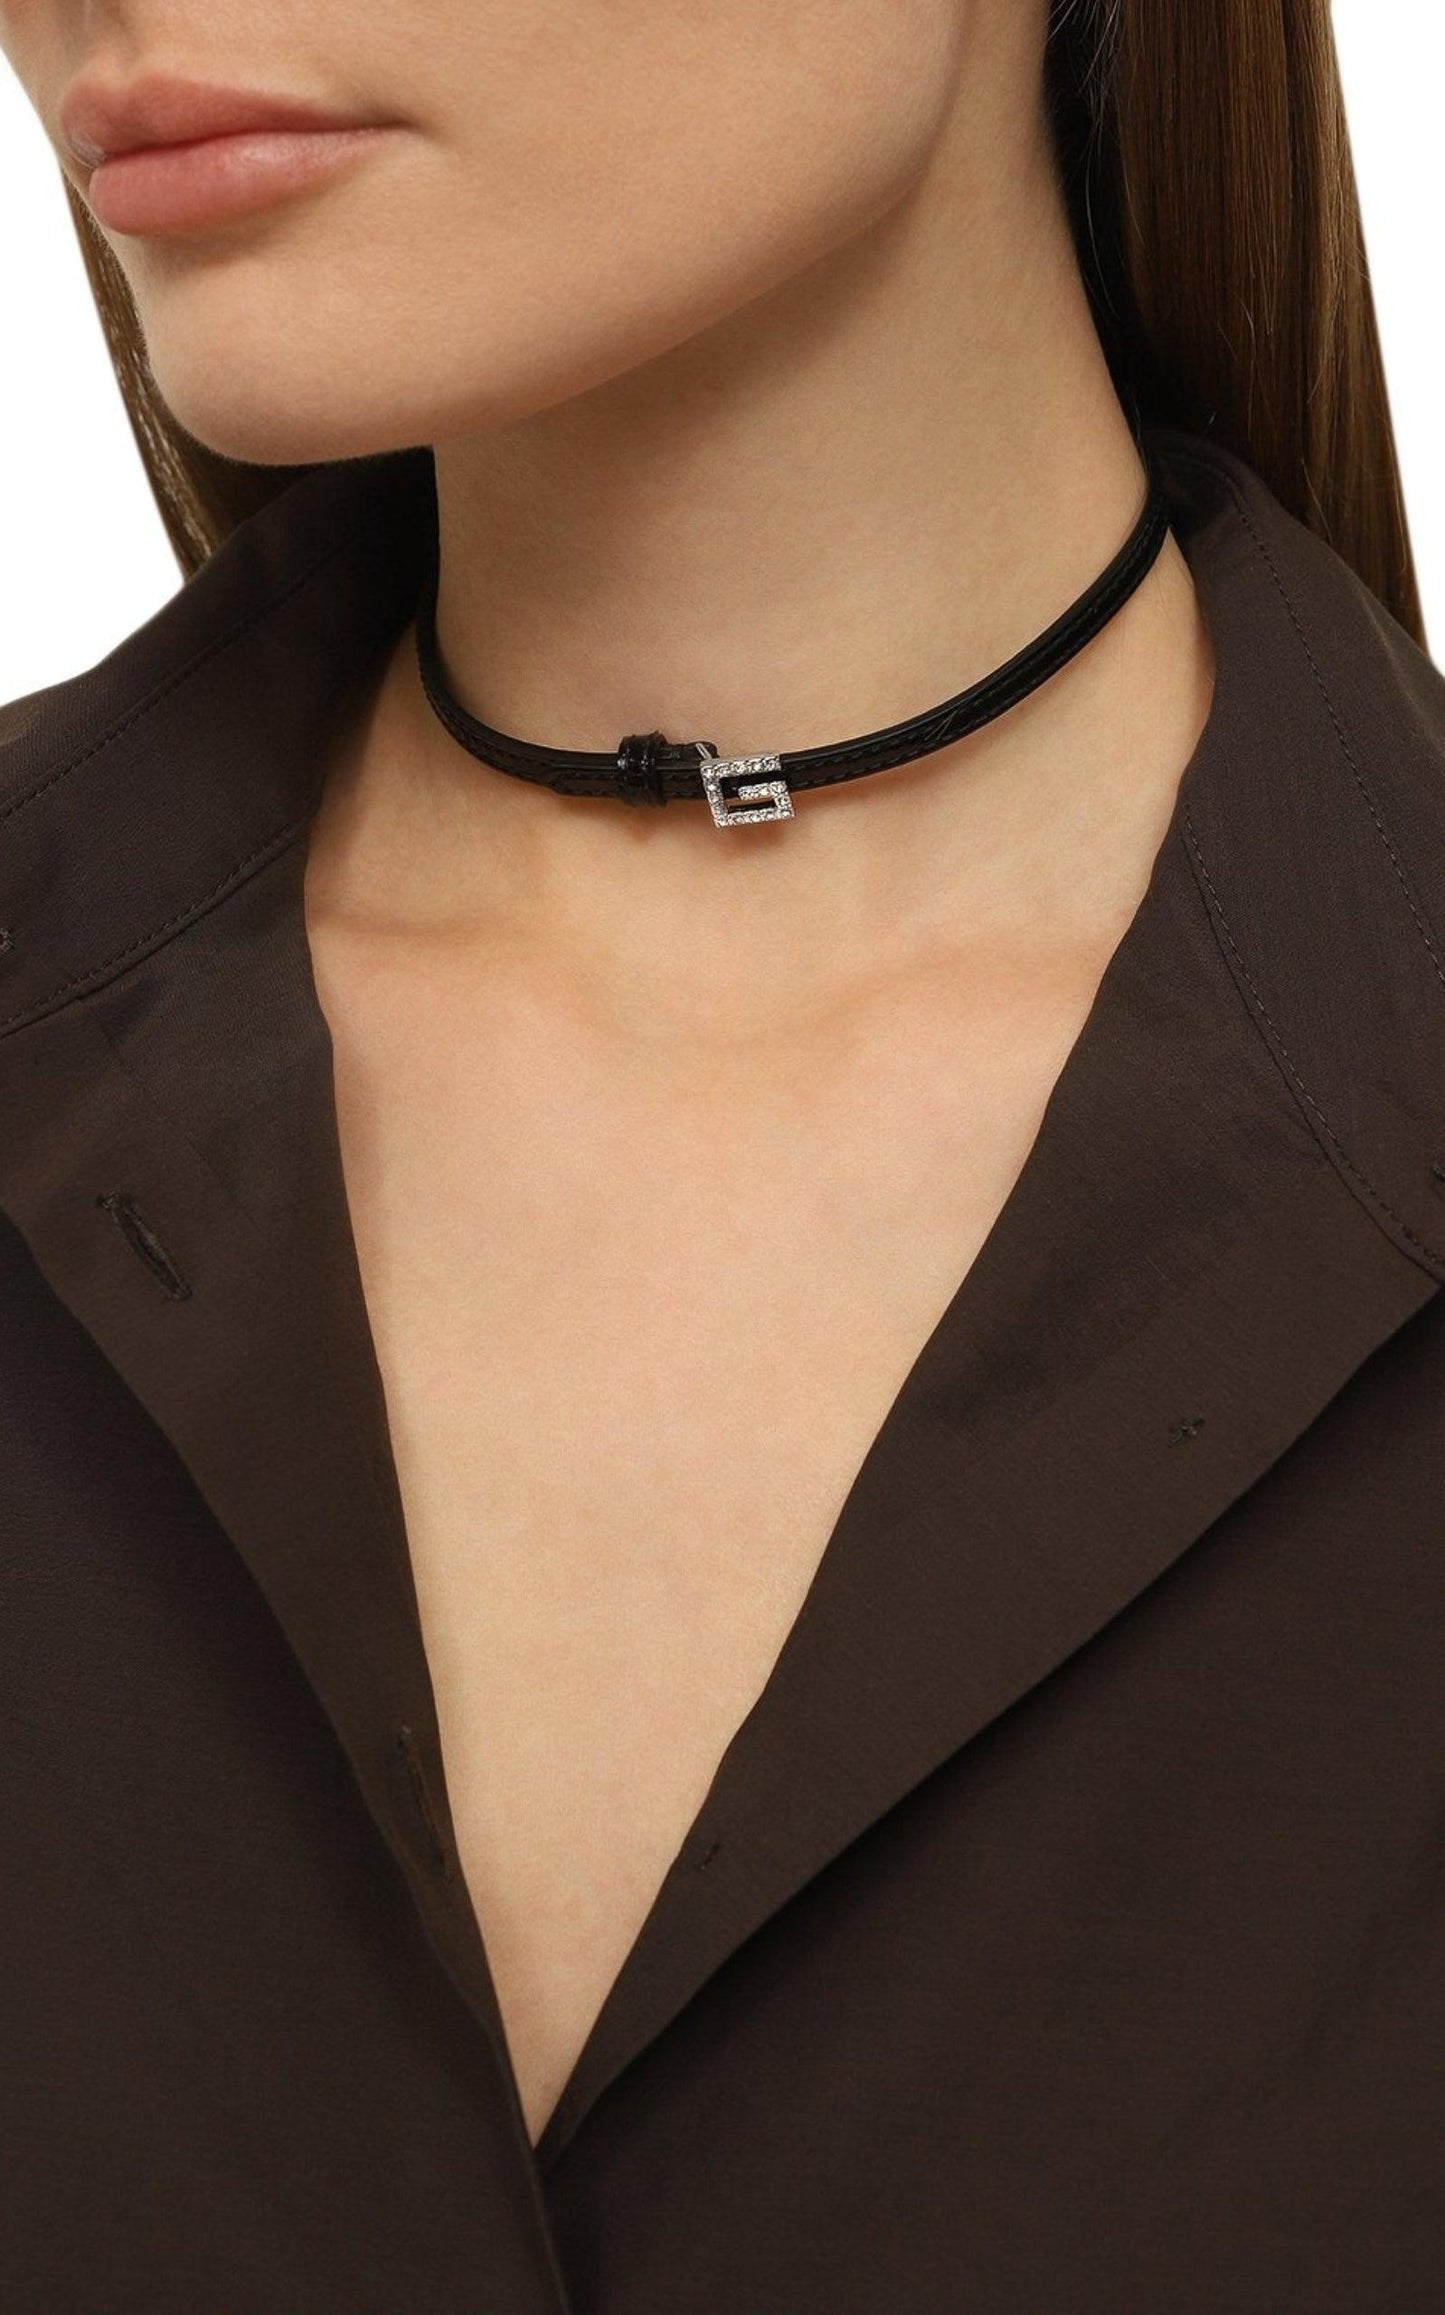  GucciLeather Choker with Square GG - Runway Catalog